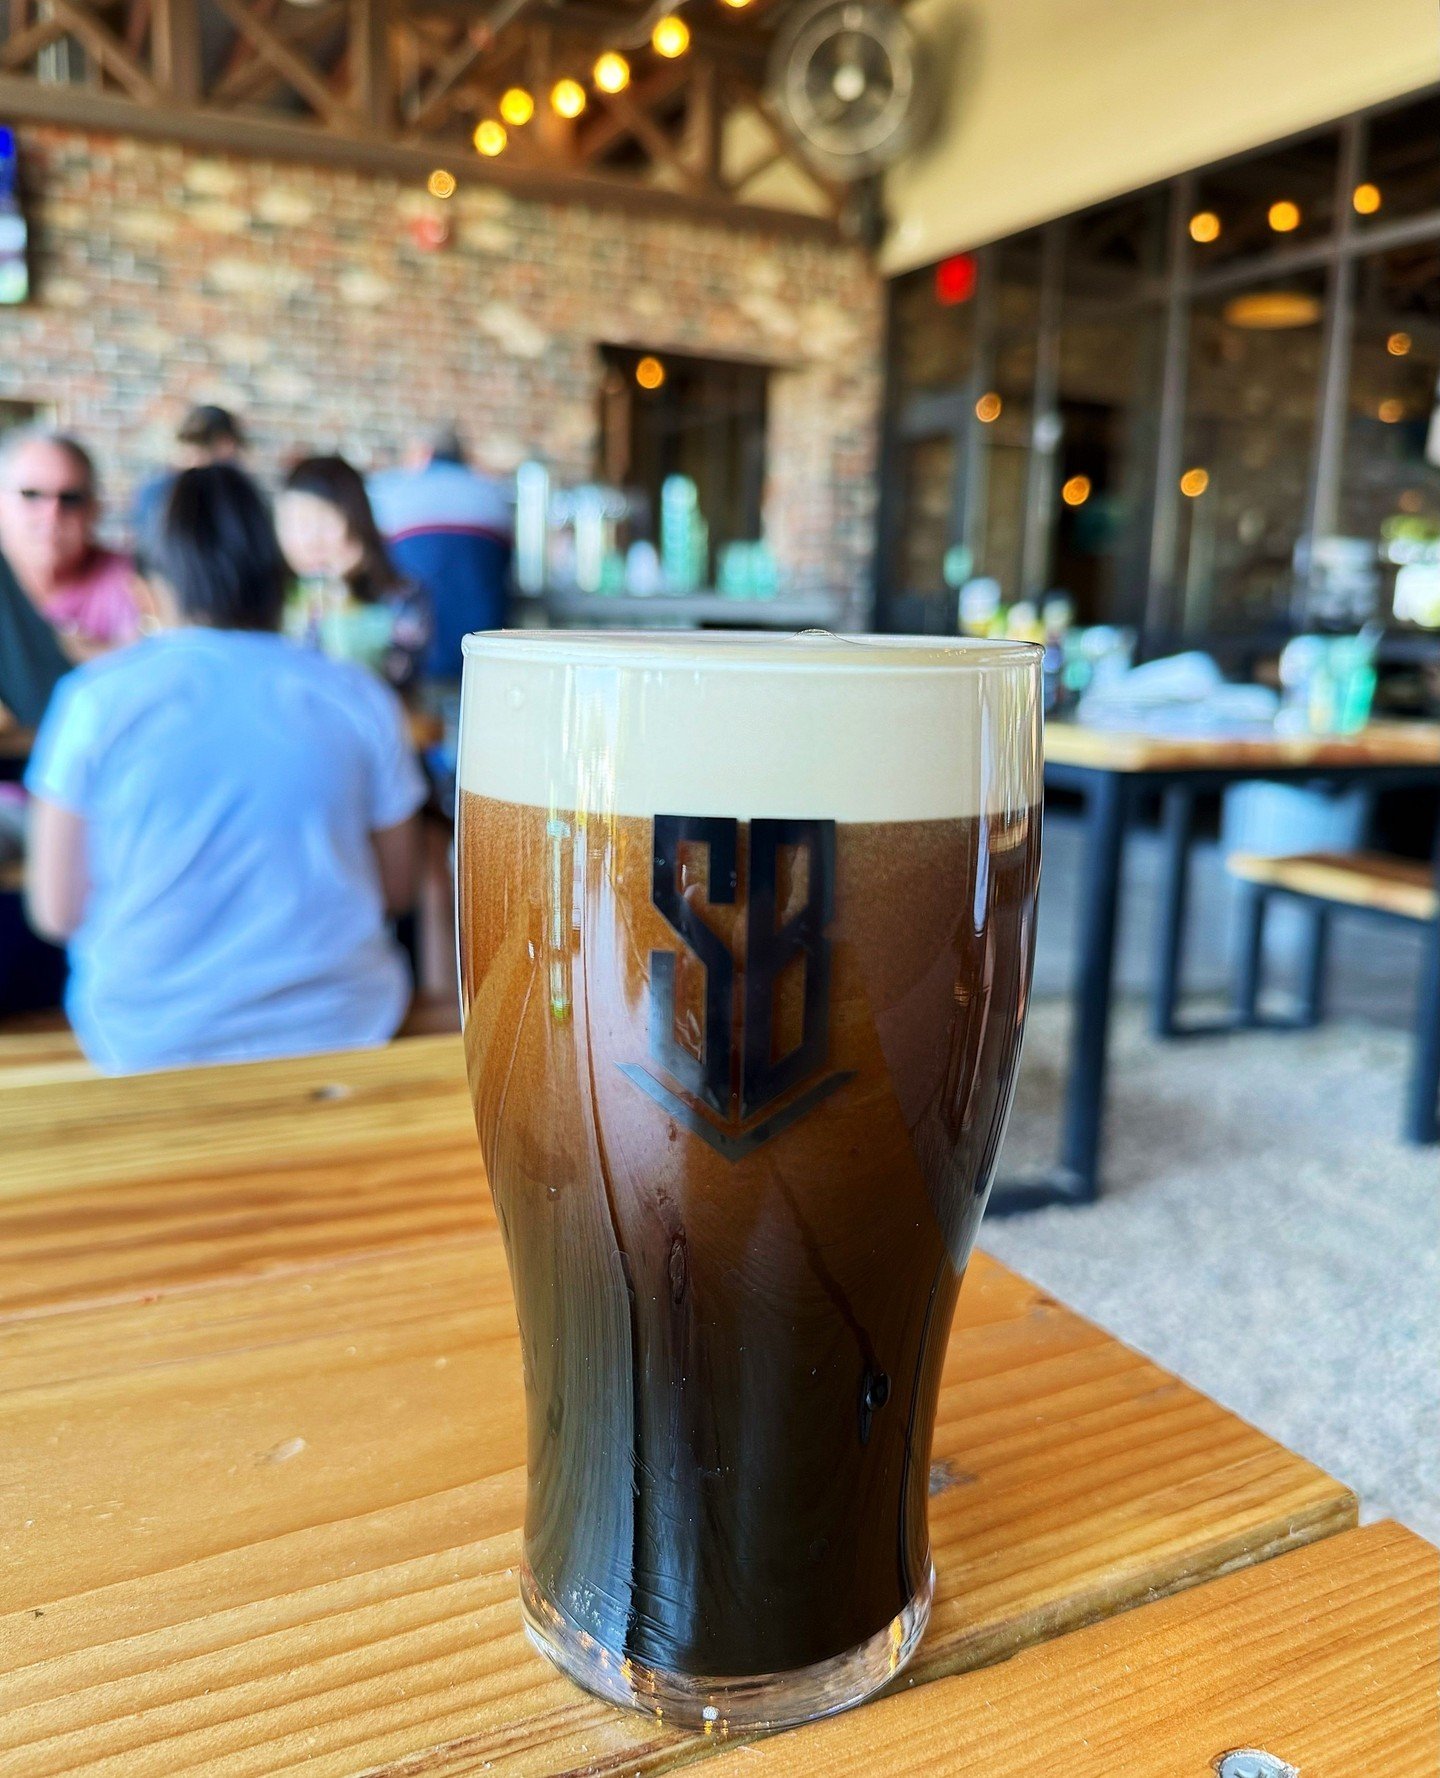 Blue Bullet Stout on nitro on the patio...⁠
Because we know some of you need your stout anytime, anywhere, any season. ⁠
⁠
⁠
#BuiltToBrew #NMcraftbeer #drinklocal #drinkcraft #stout